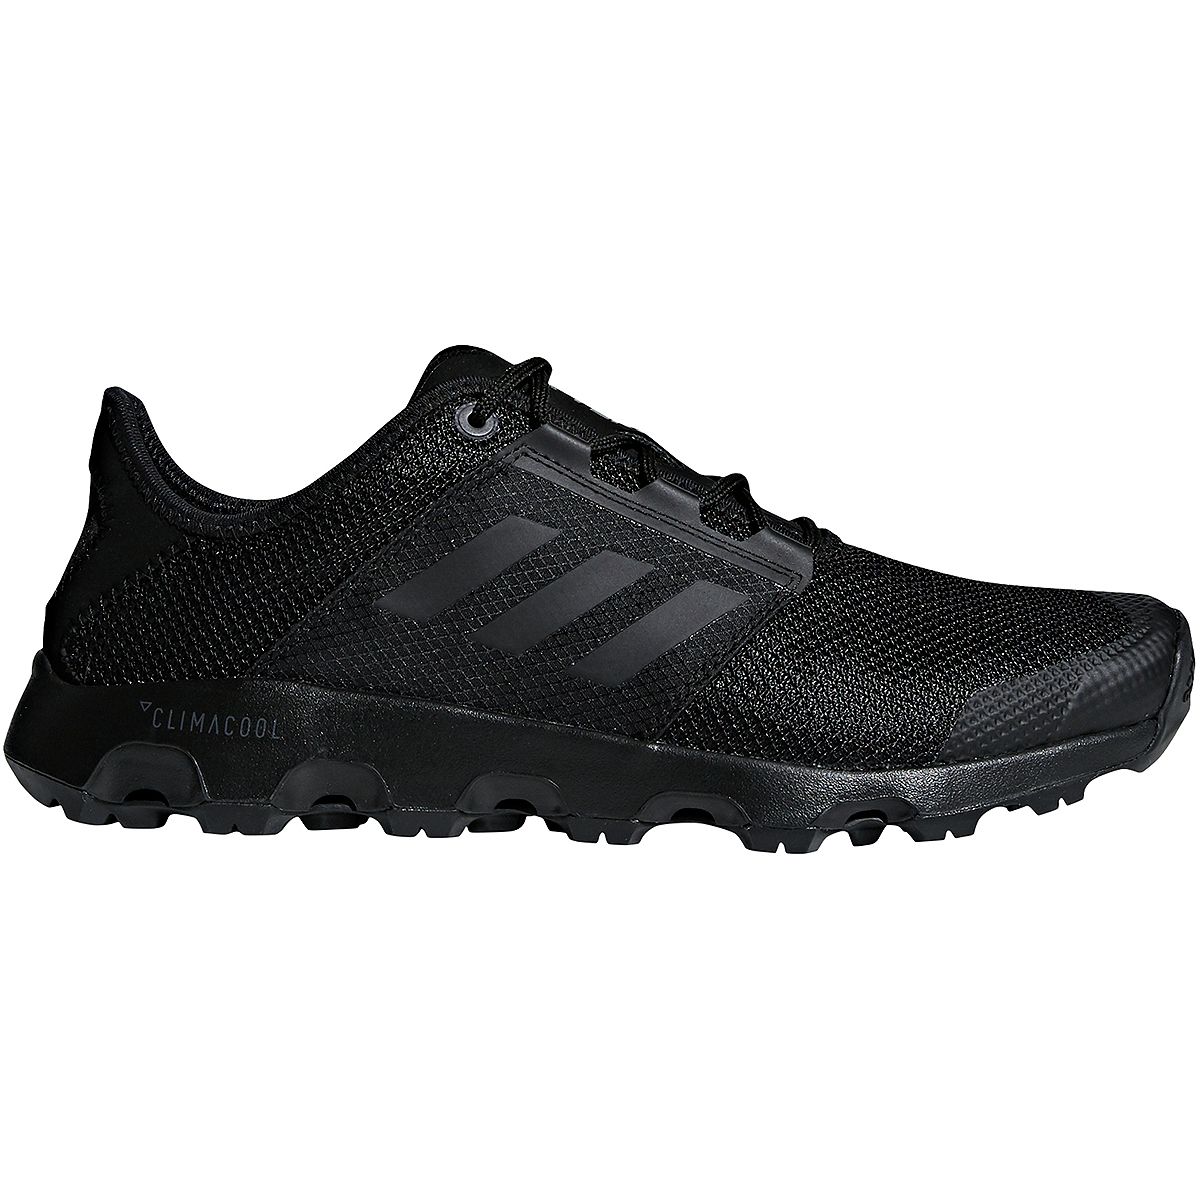 adidas outdoor climacool voyager boat shoe men's